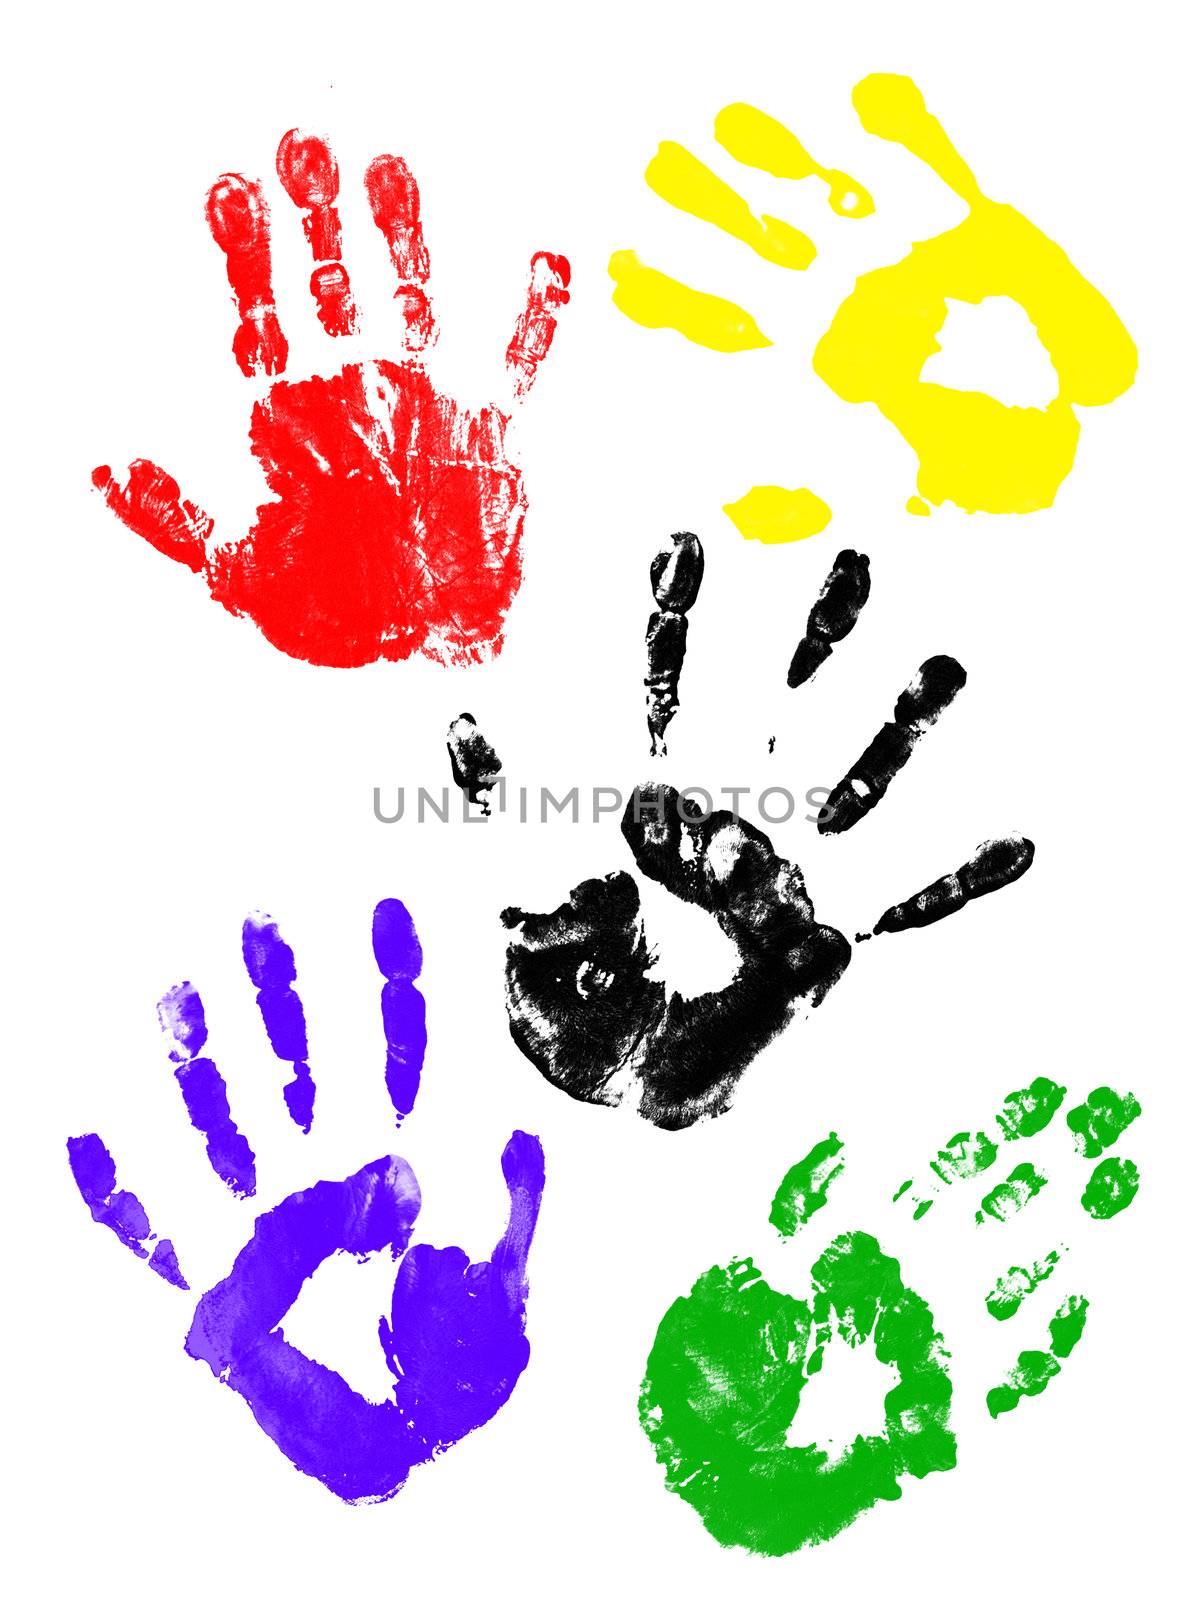 Colorful handprints by photochecker